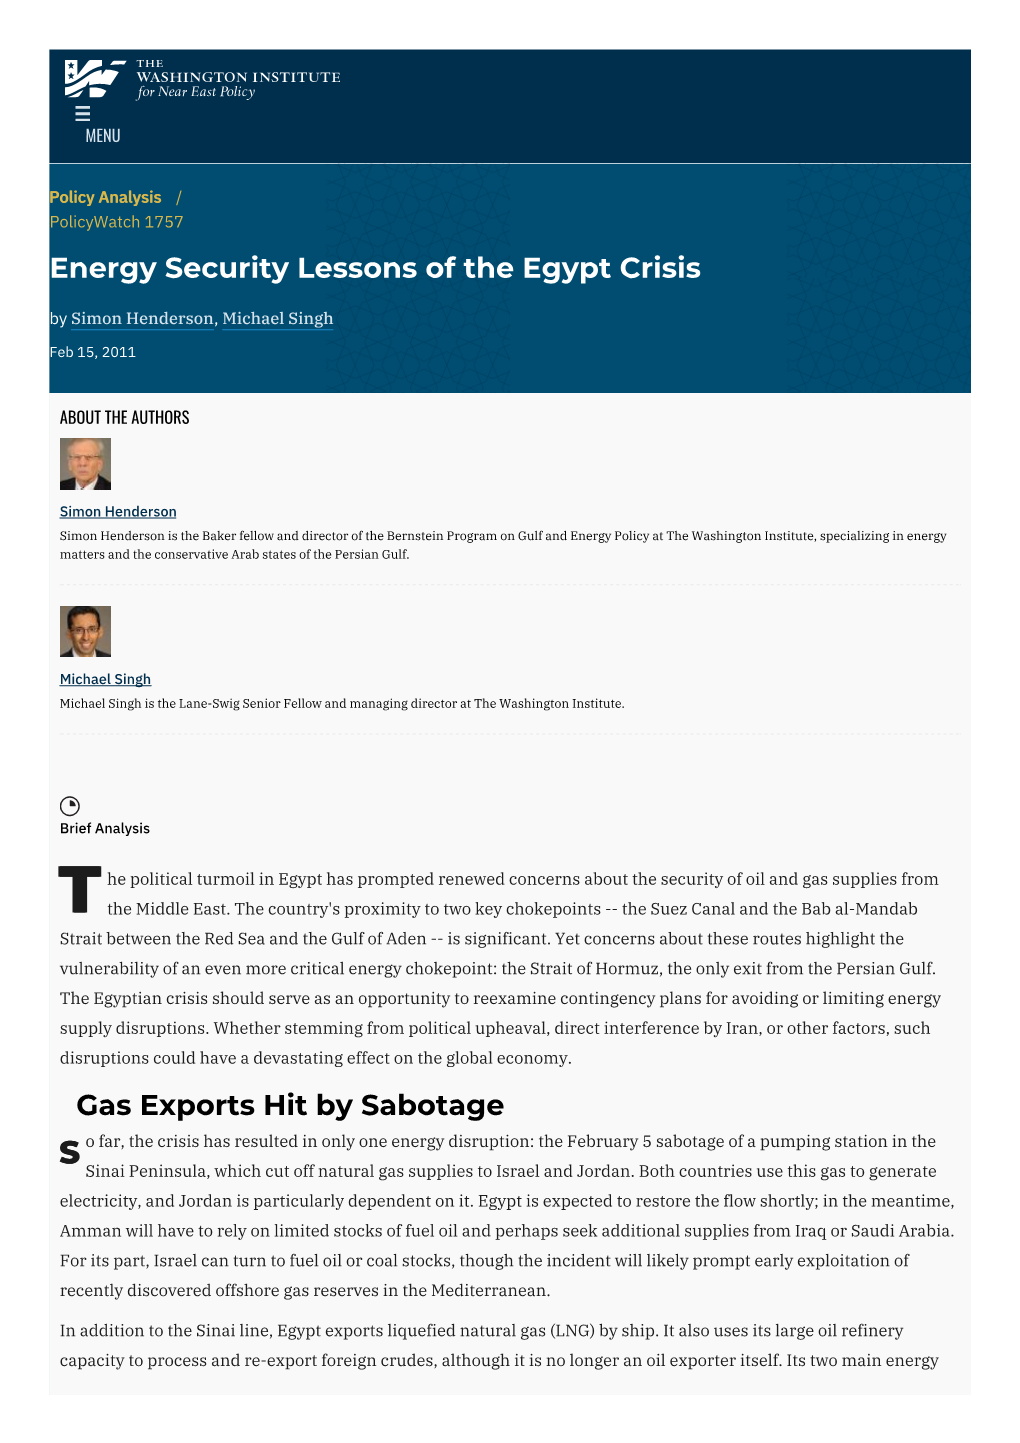 Energy Security Lessons of the Egypt Crisis | the Washington Institute